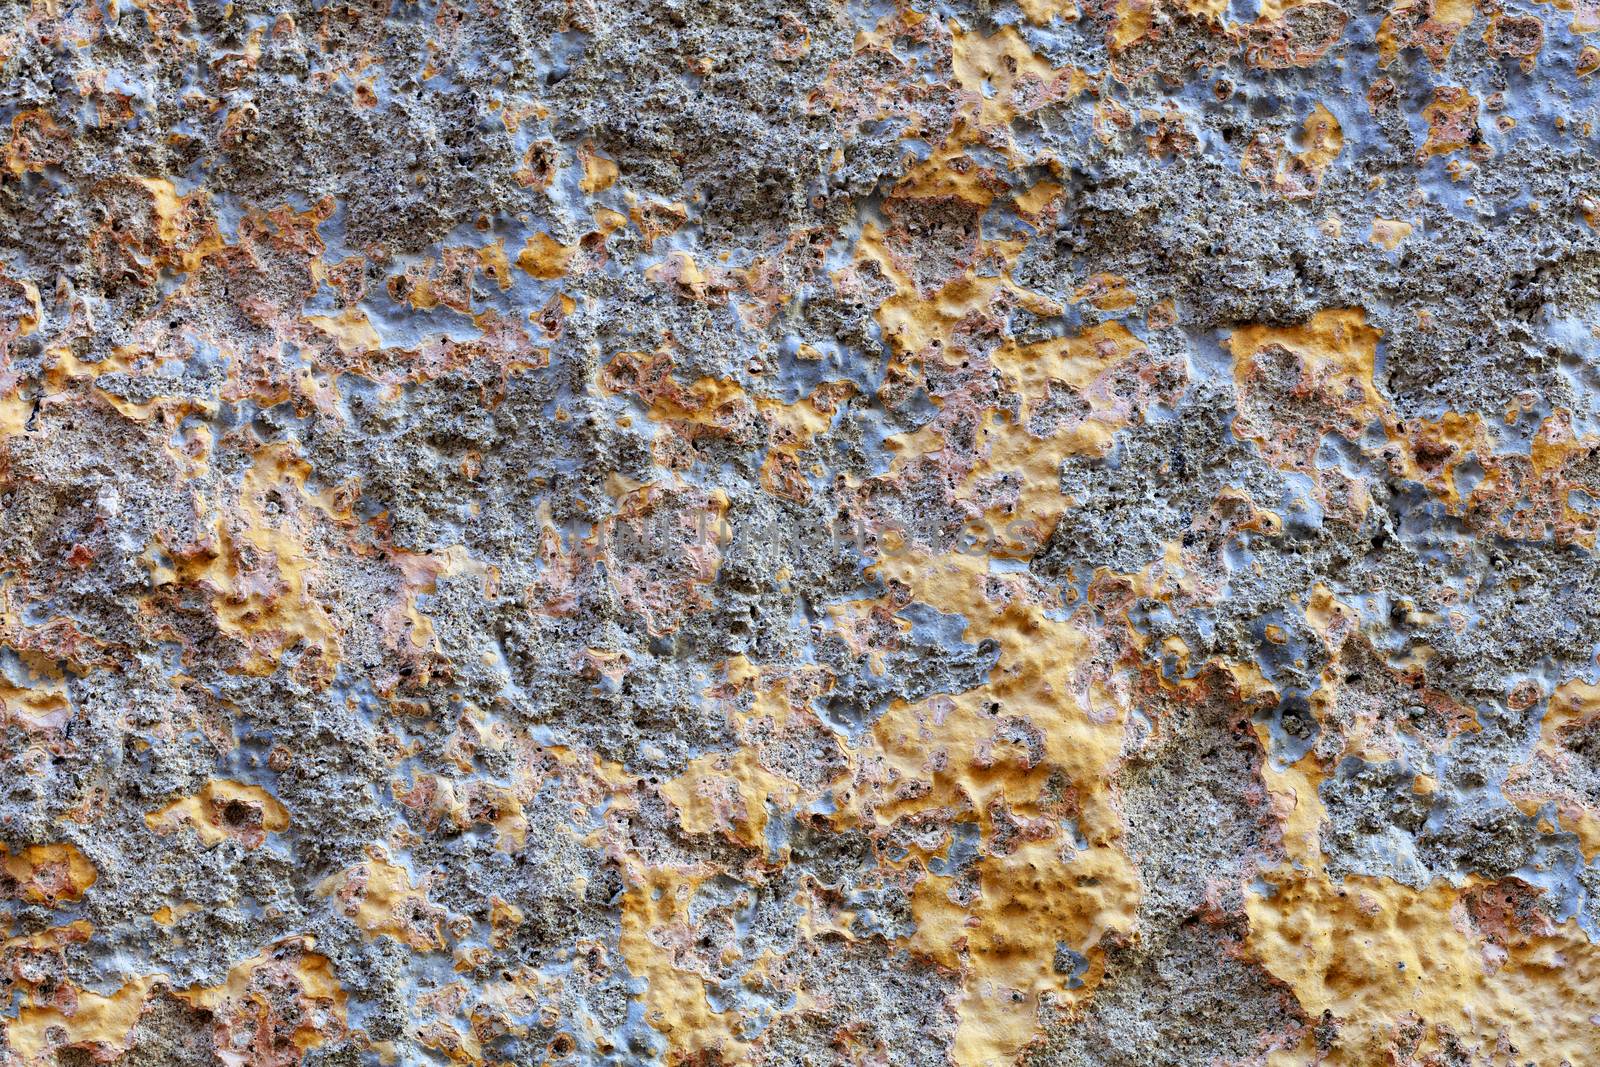 Gold fragments appear on the gray-blue plaster of the old wall.